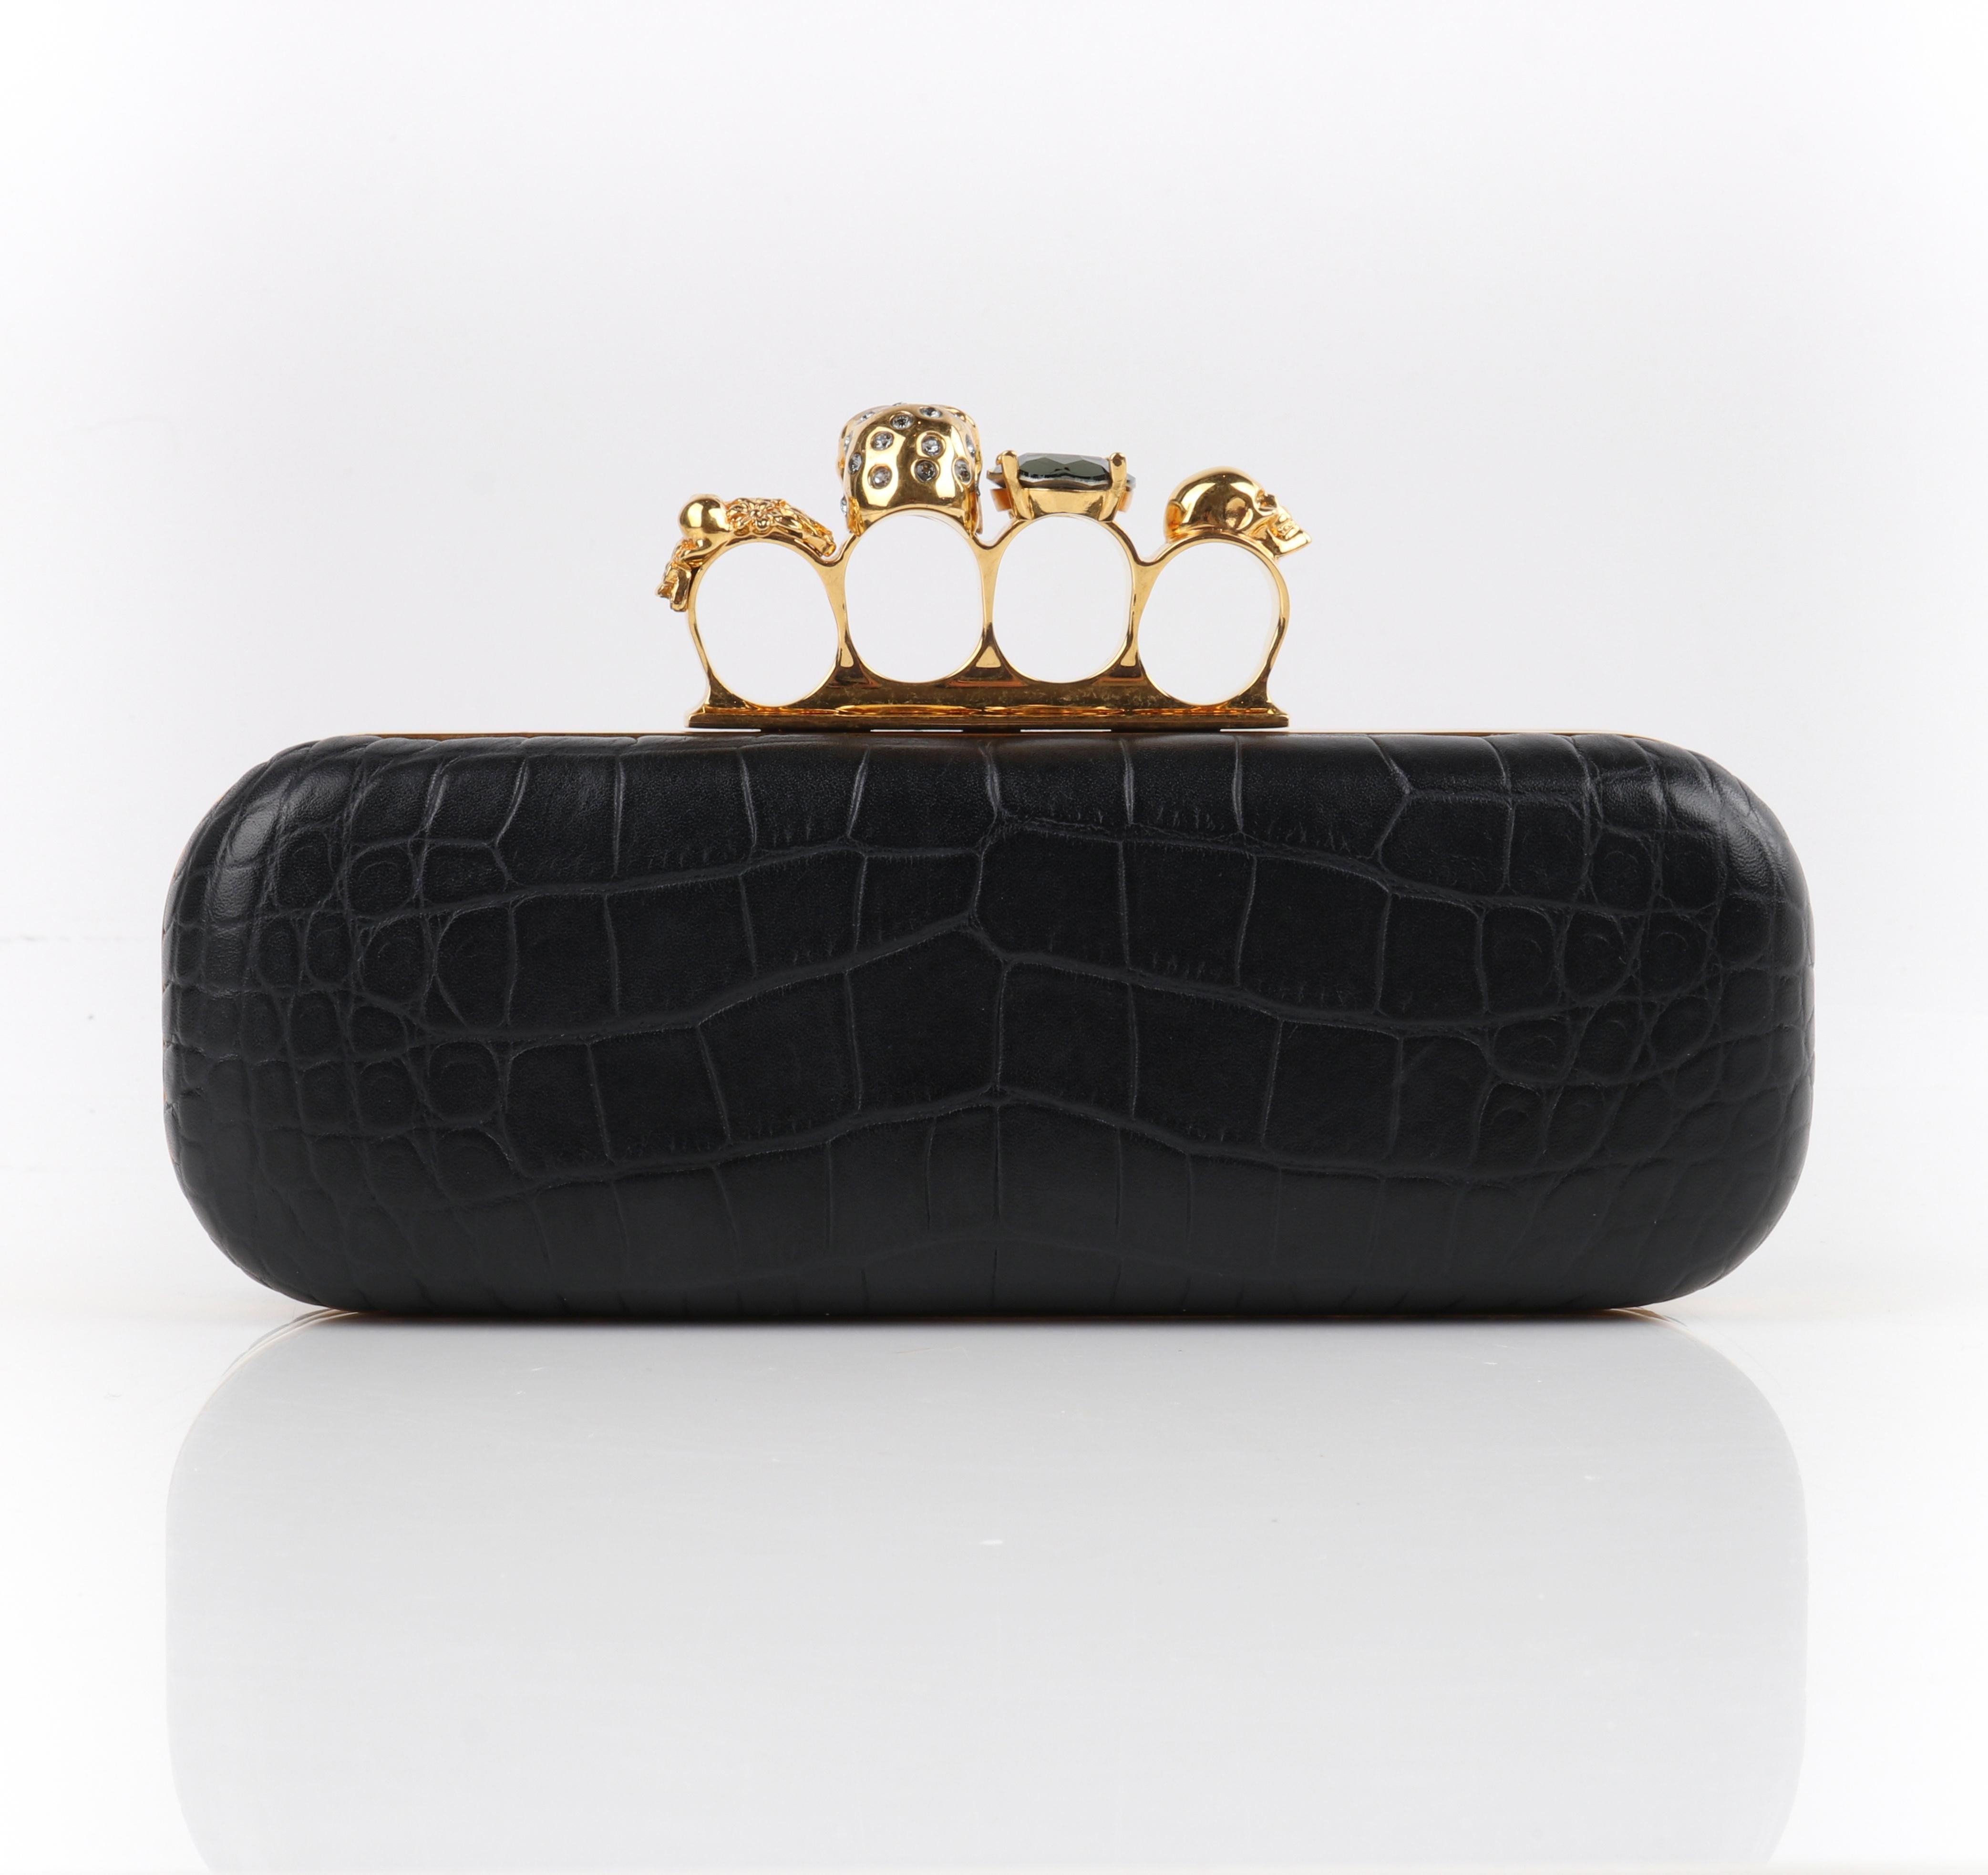 ALEXANDER McQUEEN Black Croc Embossed Leather Knuckle Duster Box Clutch w/Box 1